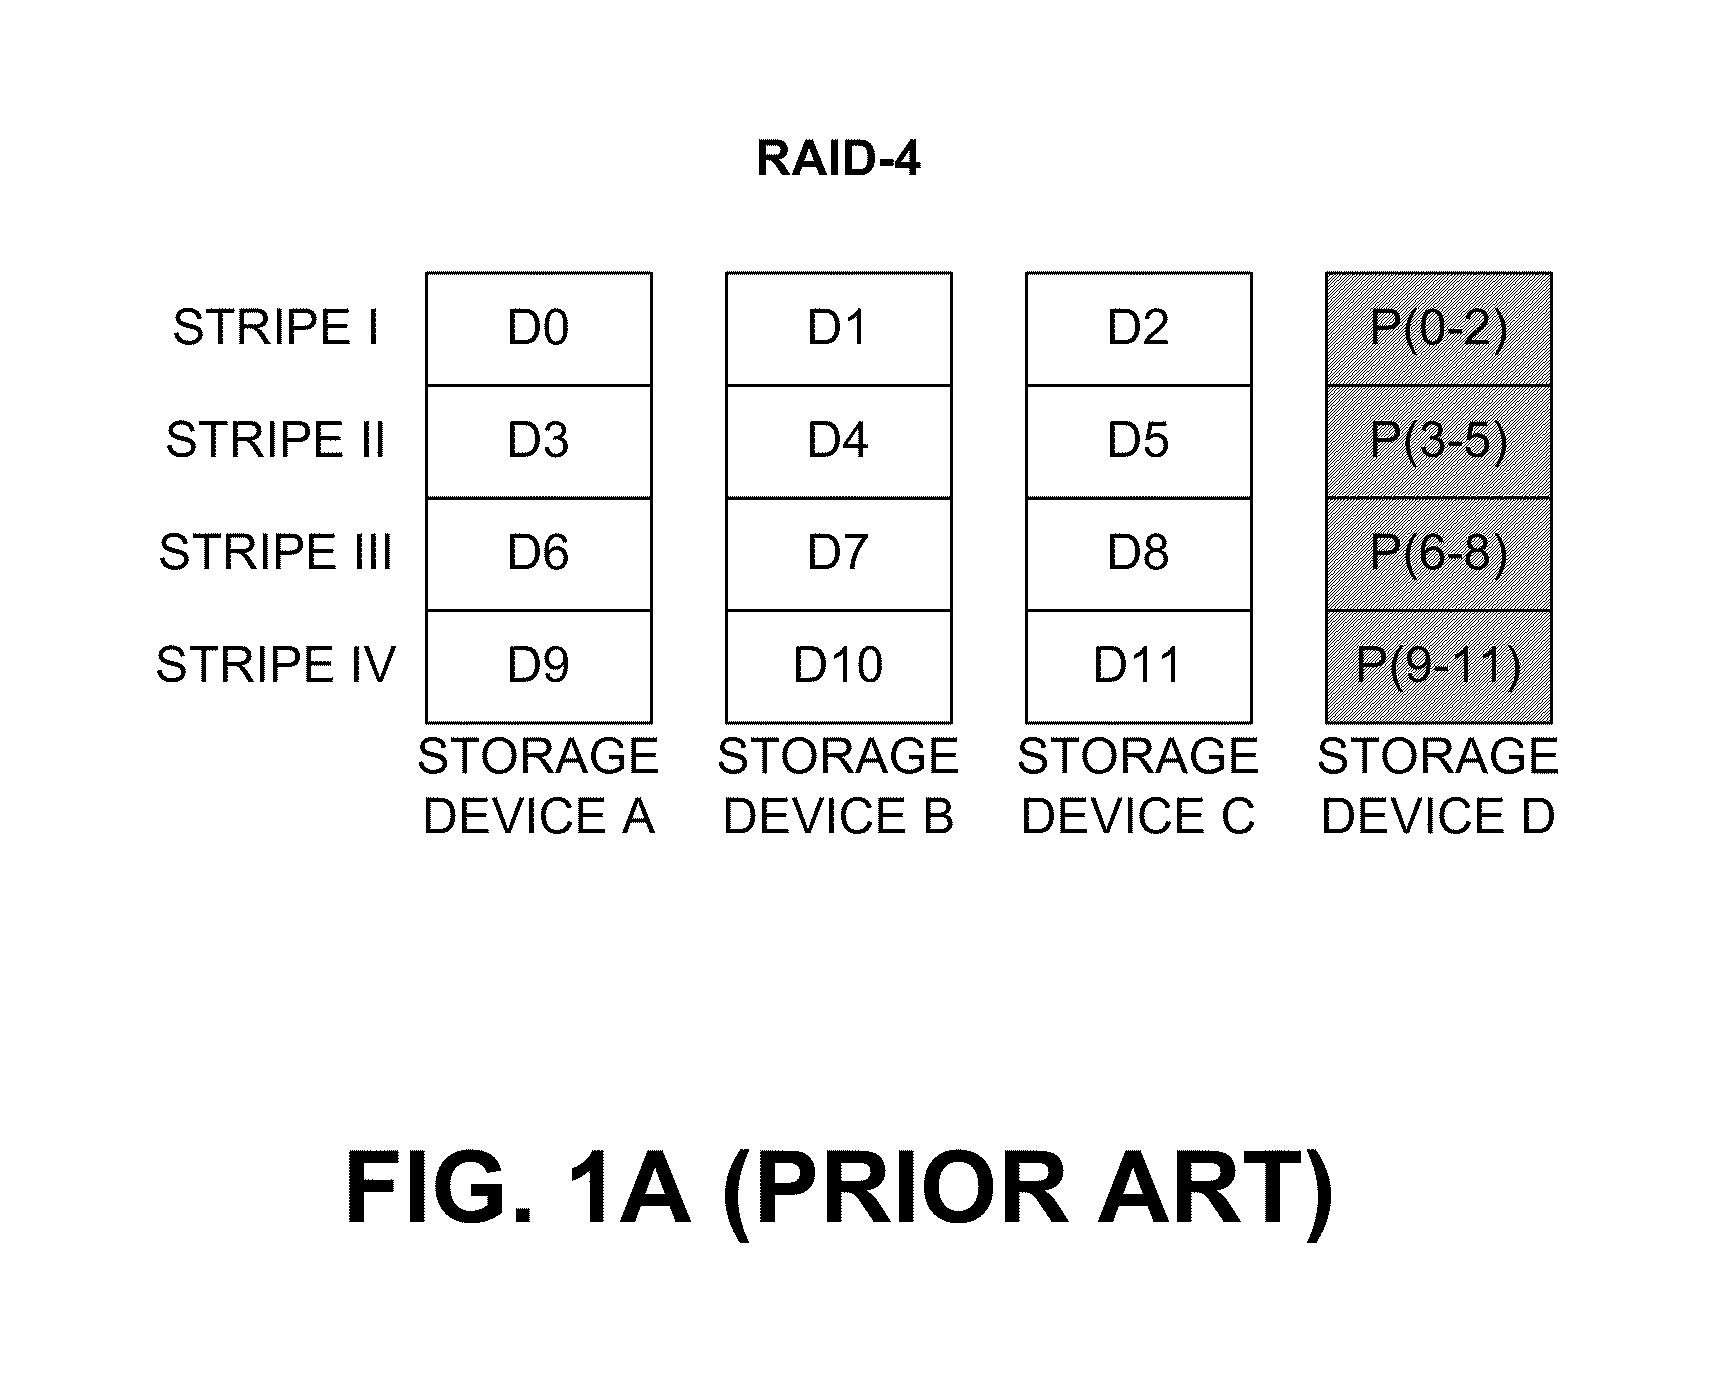 Mechanism for correcting errors beyond the fault tolerant level of a raid array in a storage system